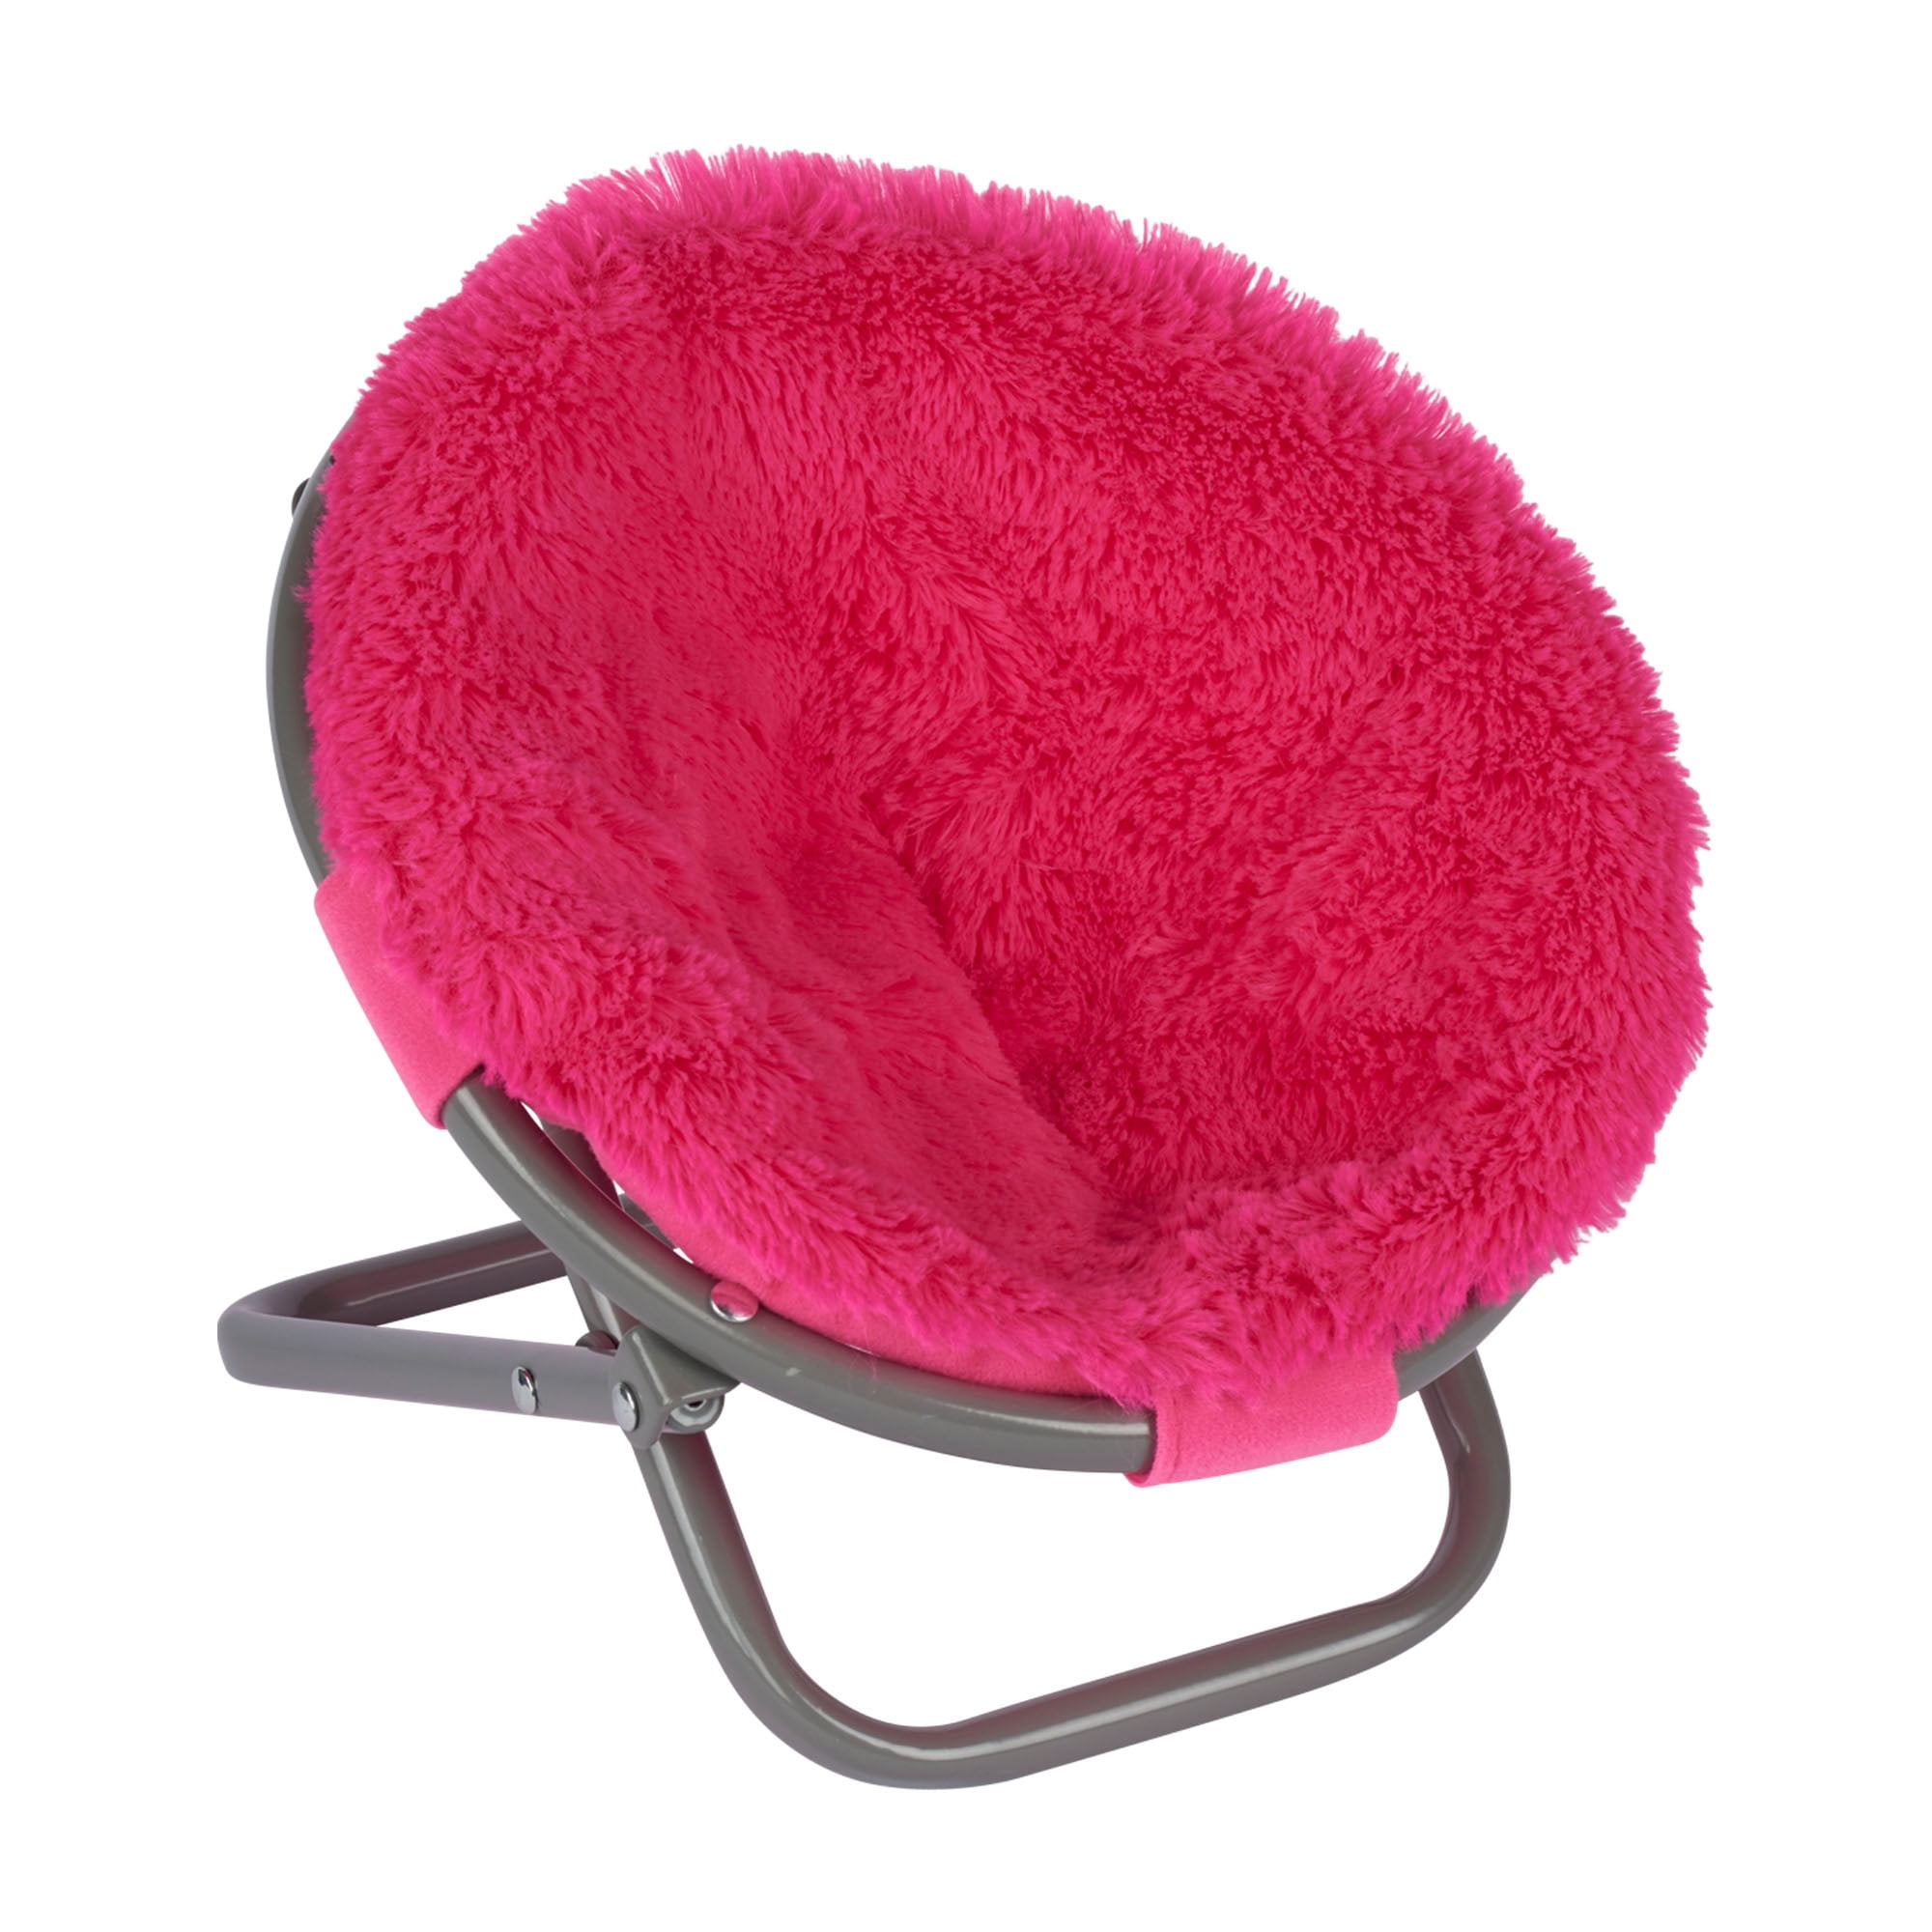 My Life As Fluffy Saucer Chair for 18" Dolls, Pink